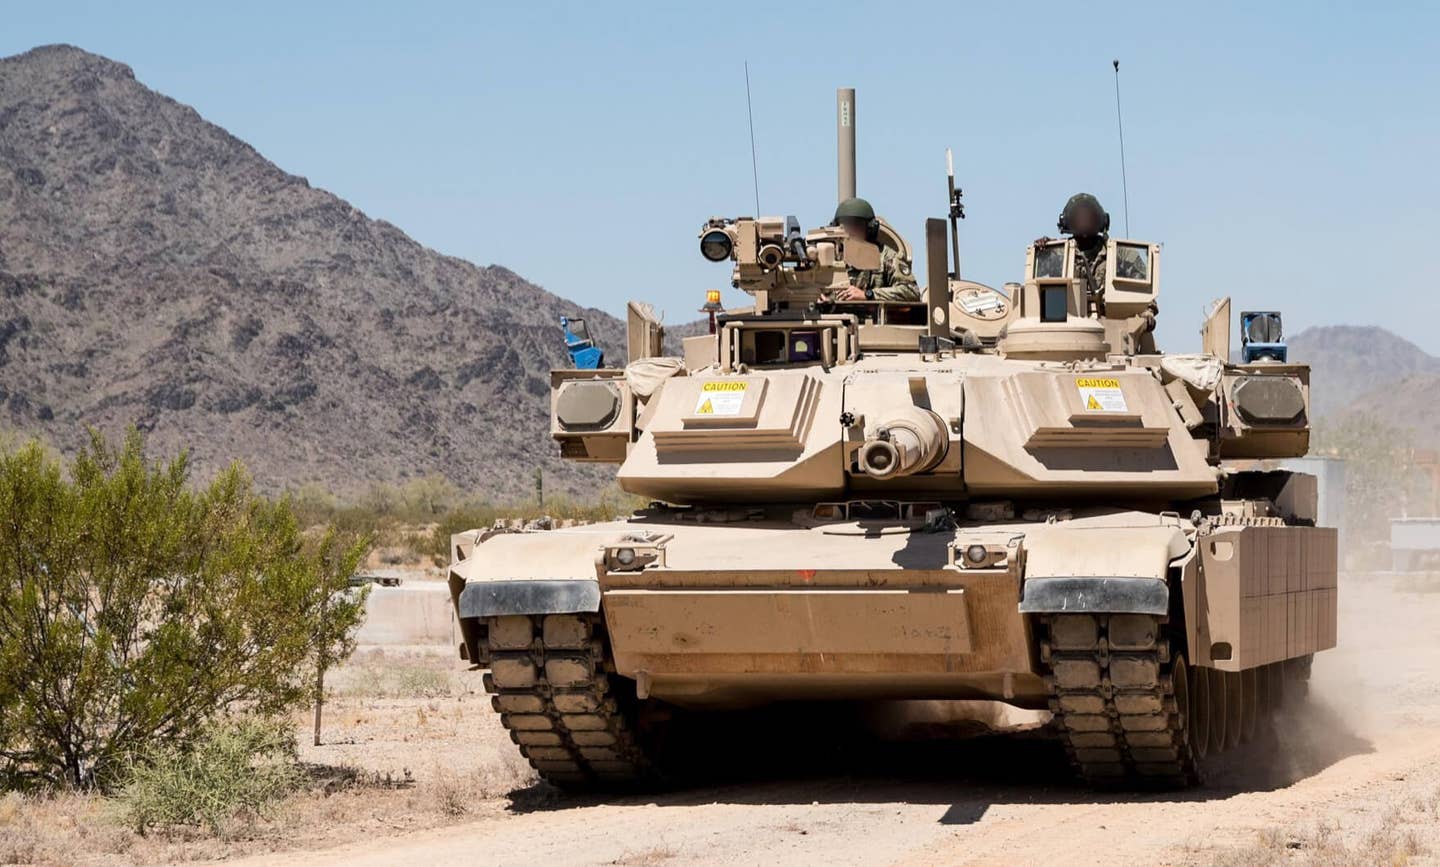 The sponsors bolted on to the side of the Abrams turret that house the Trophy's radars and other systems can be seen in this image. (US Army)